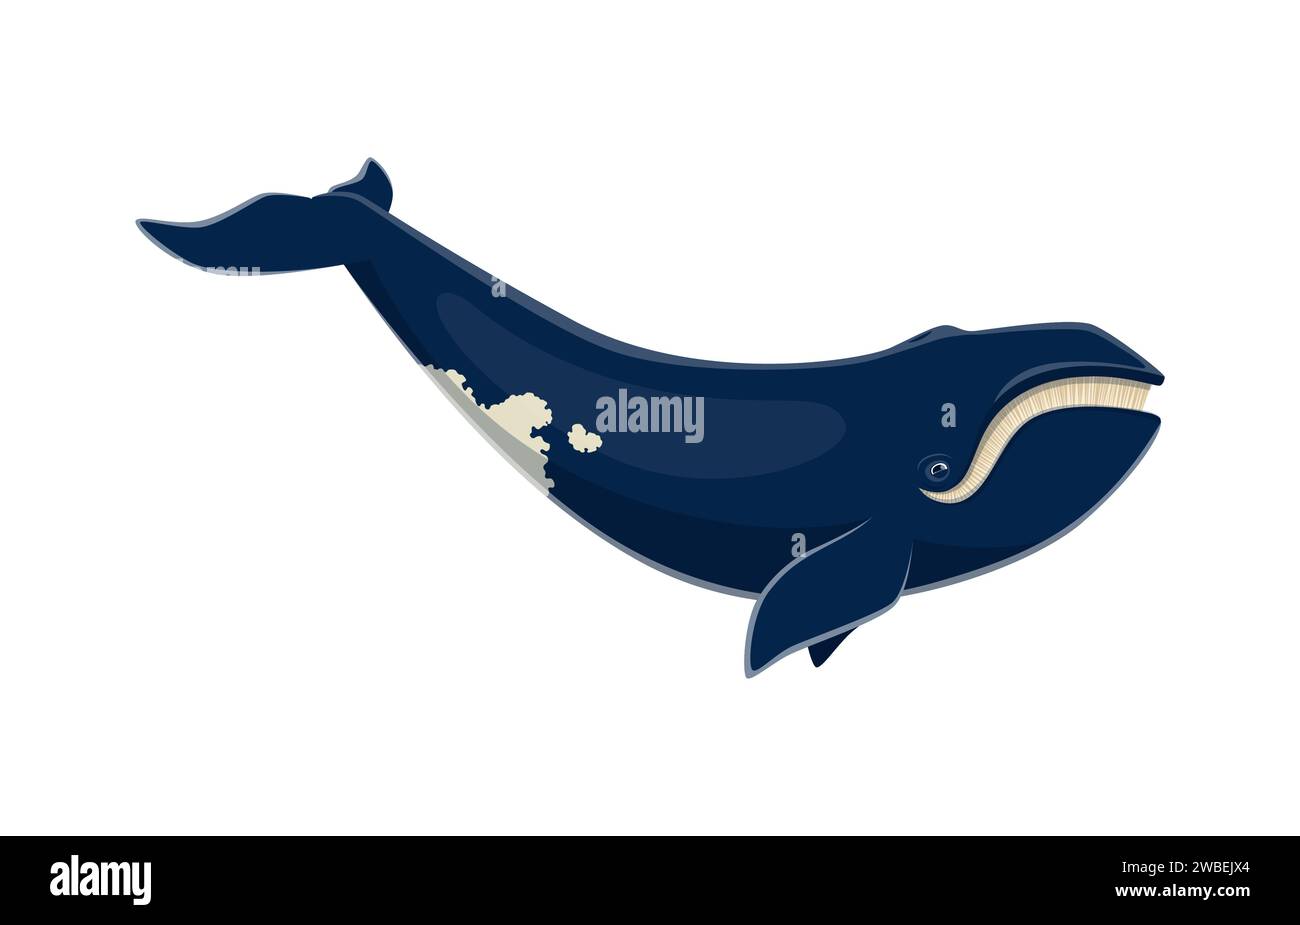 Blue whale character. Isolated cartoon vector largest animal on earth, living in the oceans. Majestic and magnificent sea creature known for its immense size and distinctive blue-gray coloration Stock Vector